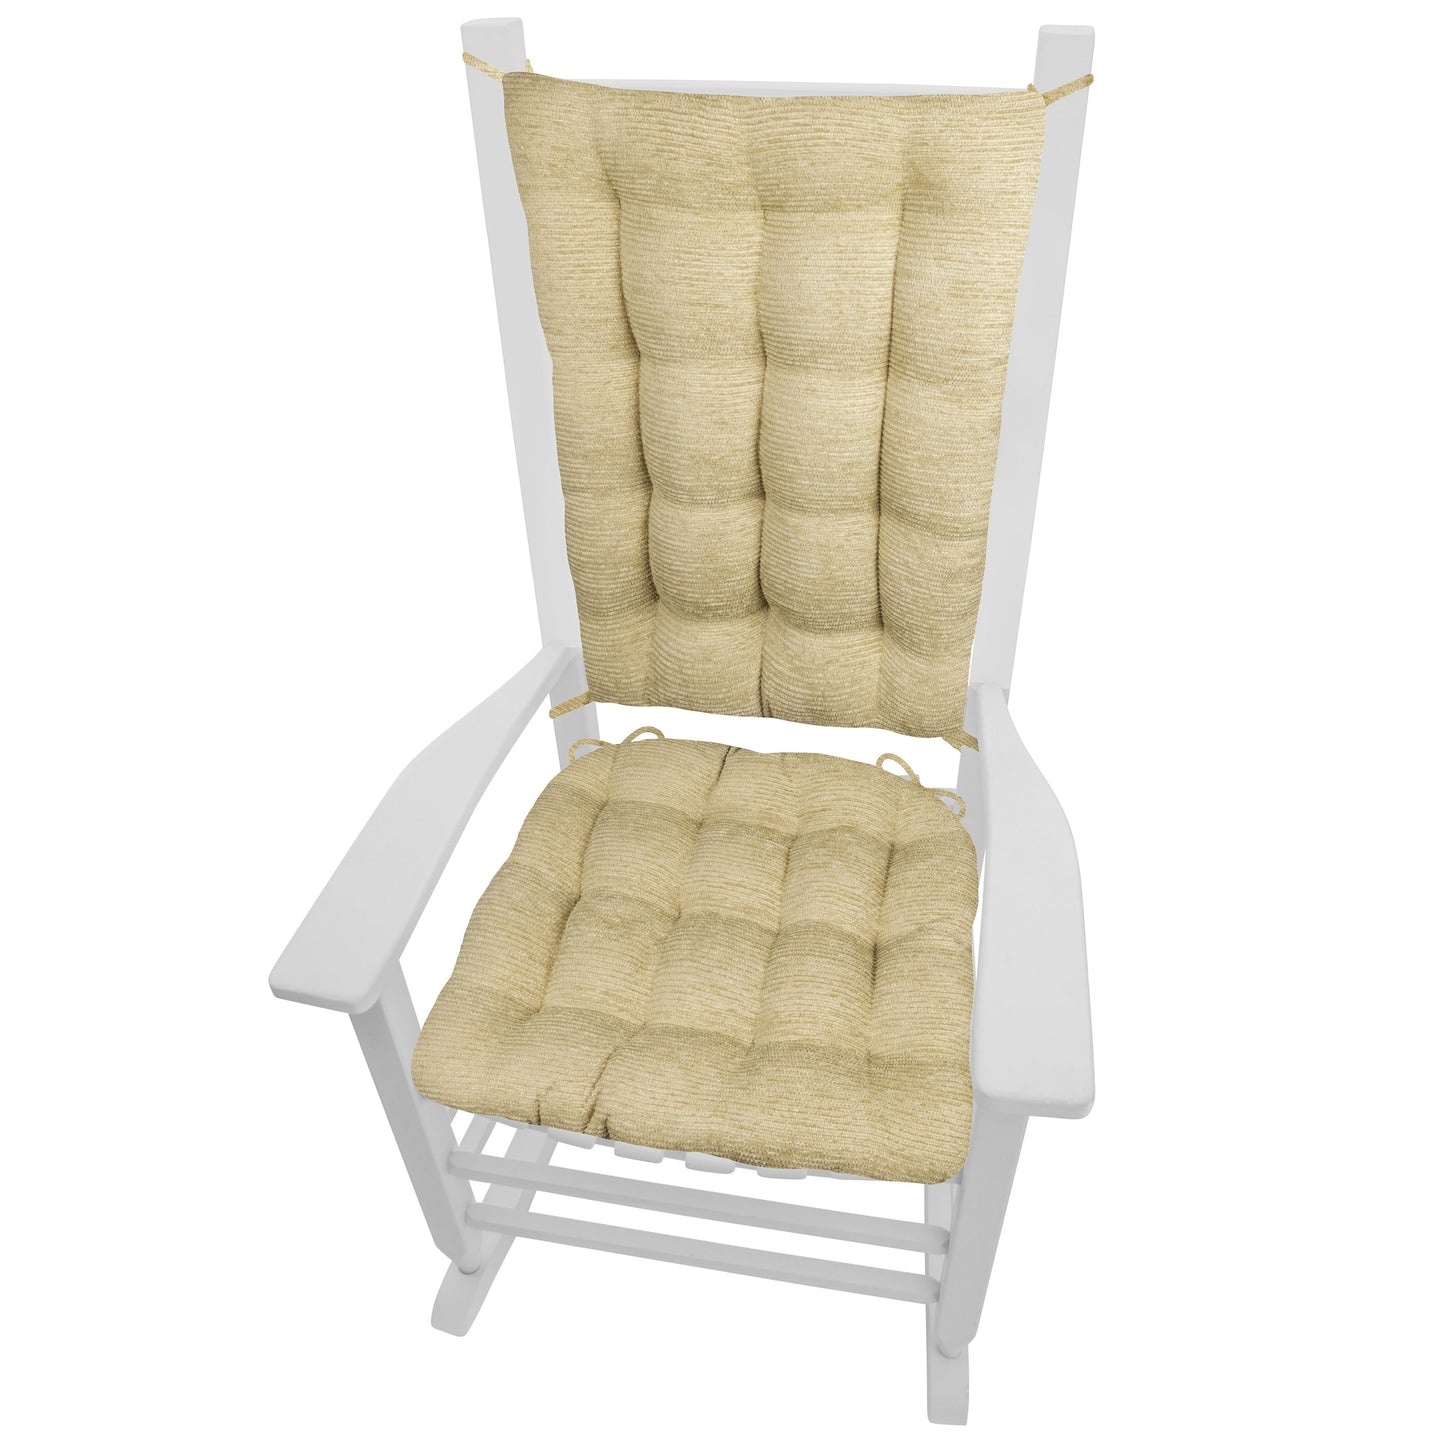 Country Comfort Rocking Chair Cushions - Latex Foam Fill